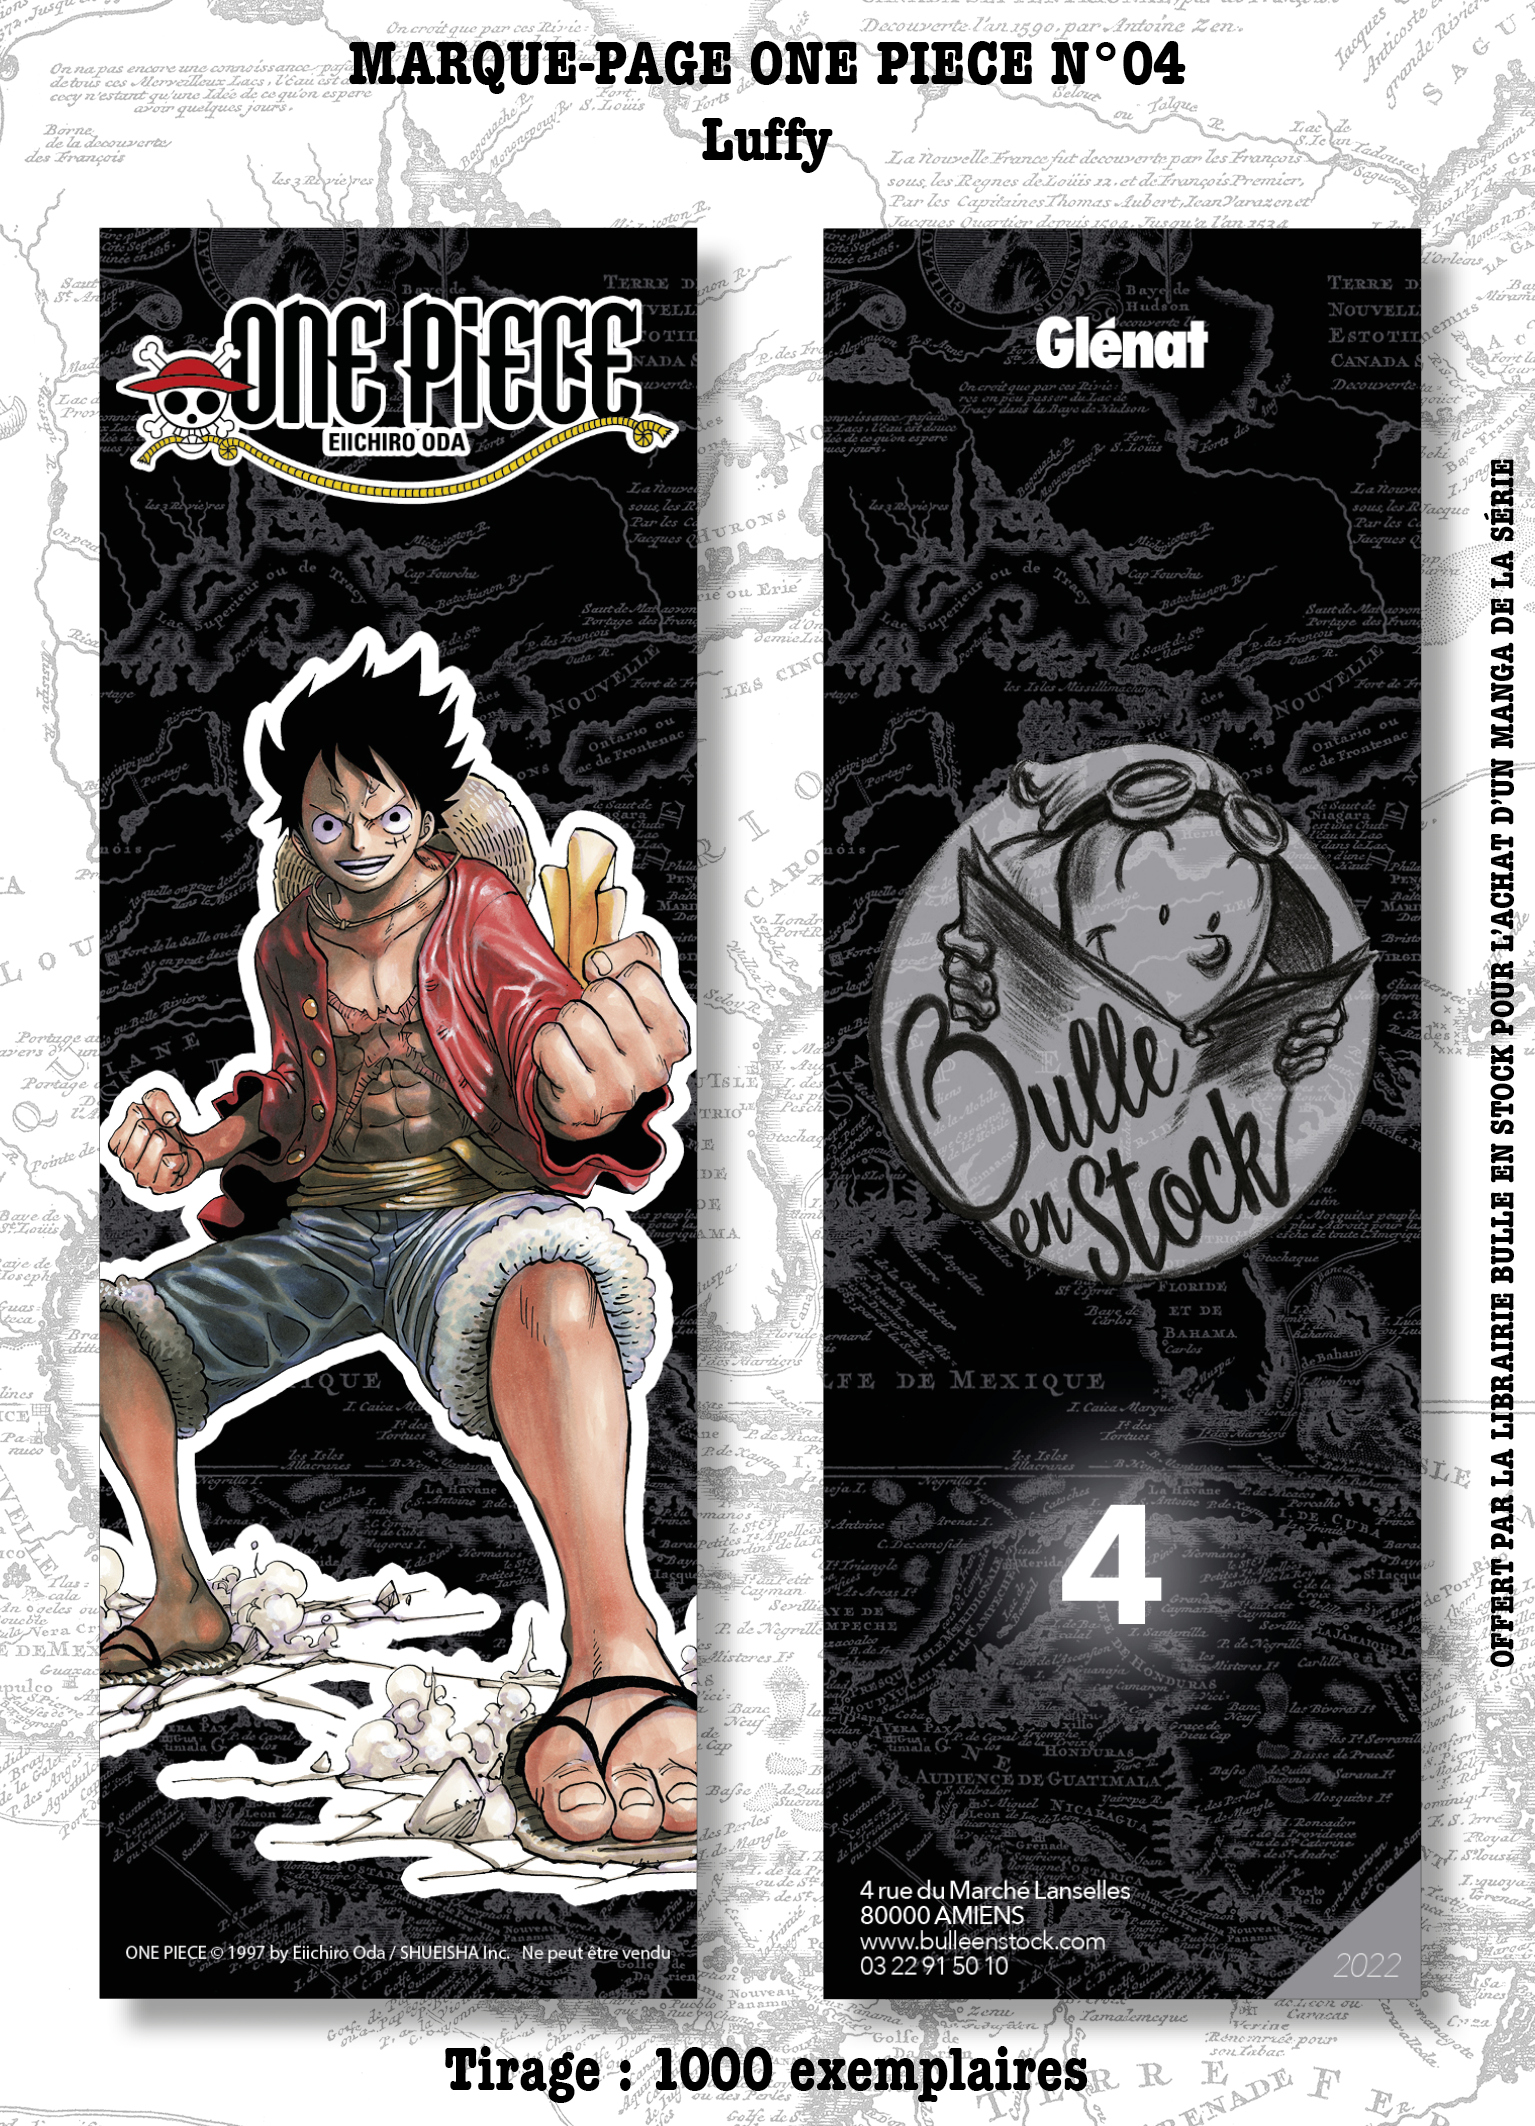 Marque-pages Manga Luxe Bulle en Stock 4 Luffy One piece (Bulle en stock)